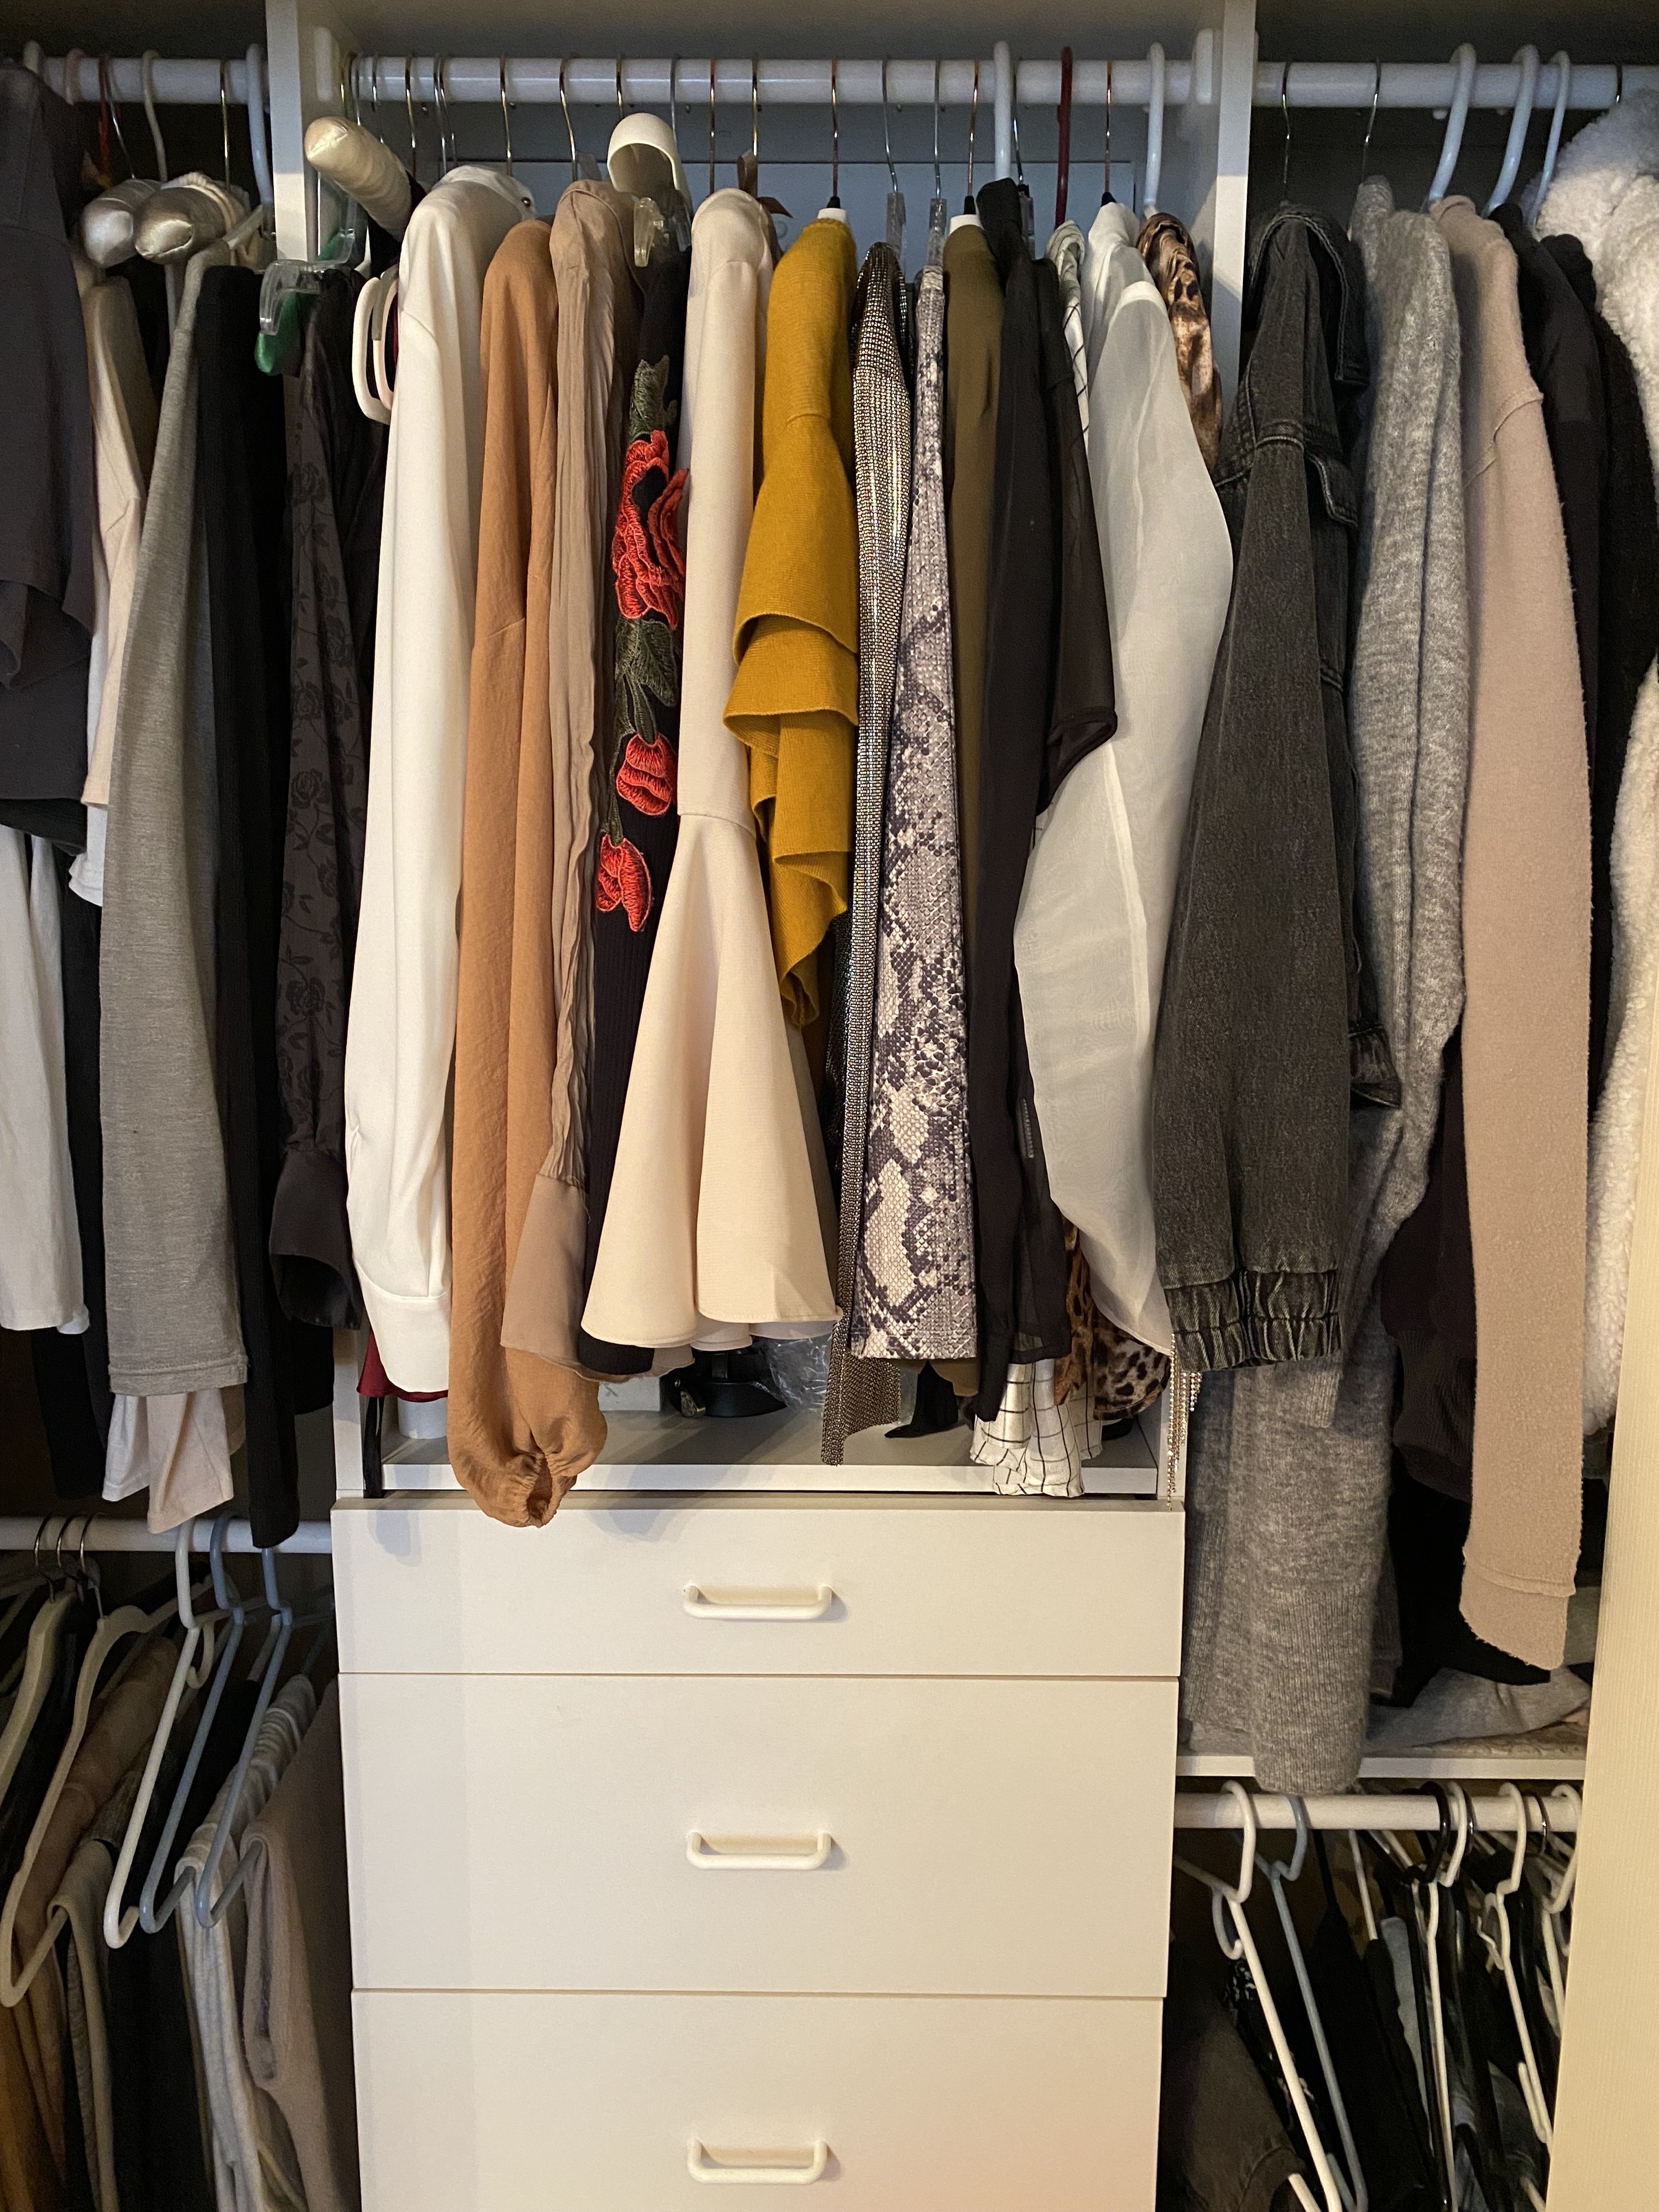 Different shelves and clothes hanging on hangers with draws in the middle